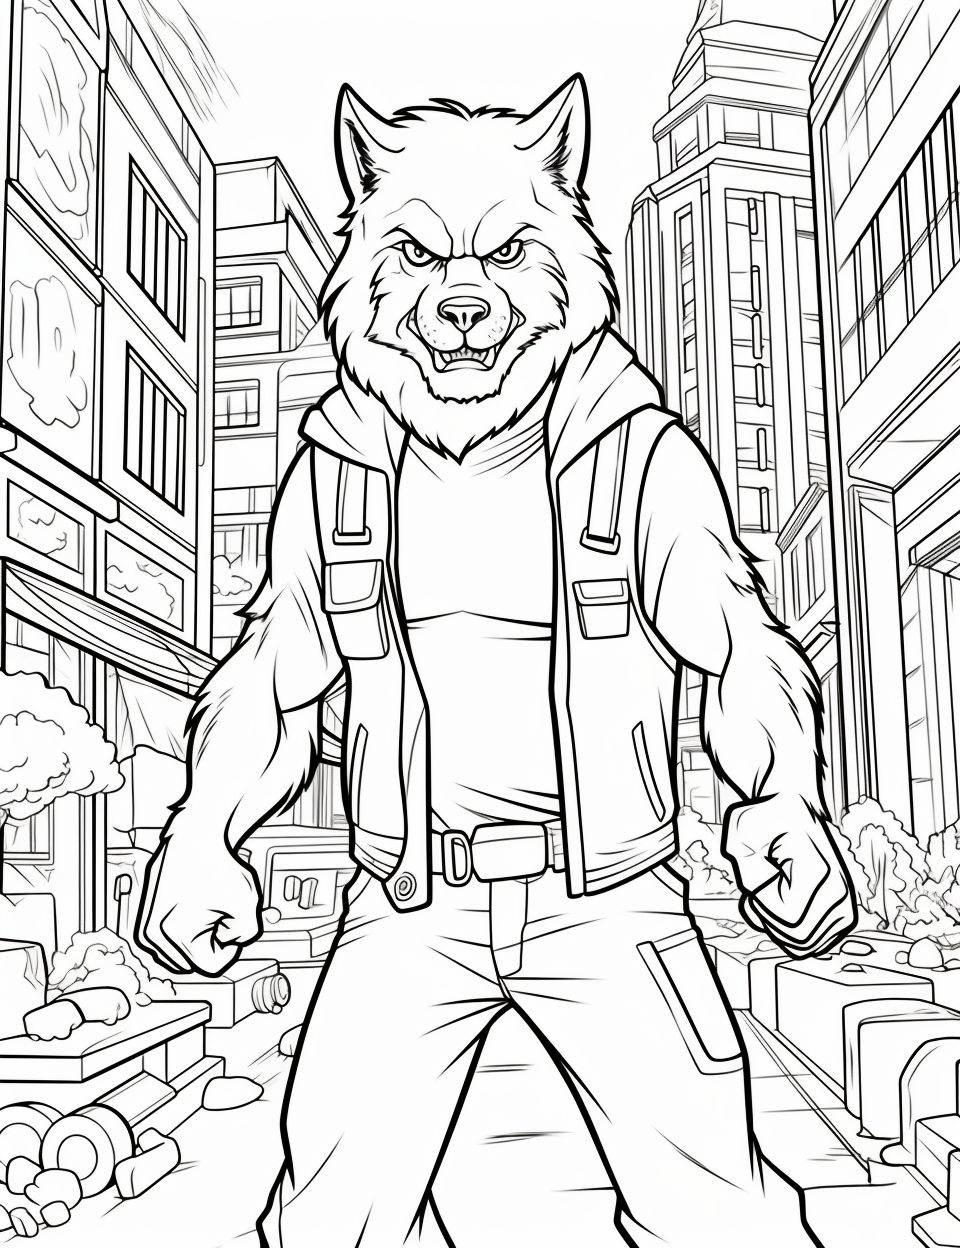 Werewolf coloring books for children years old coloring pages